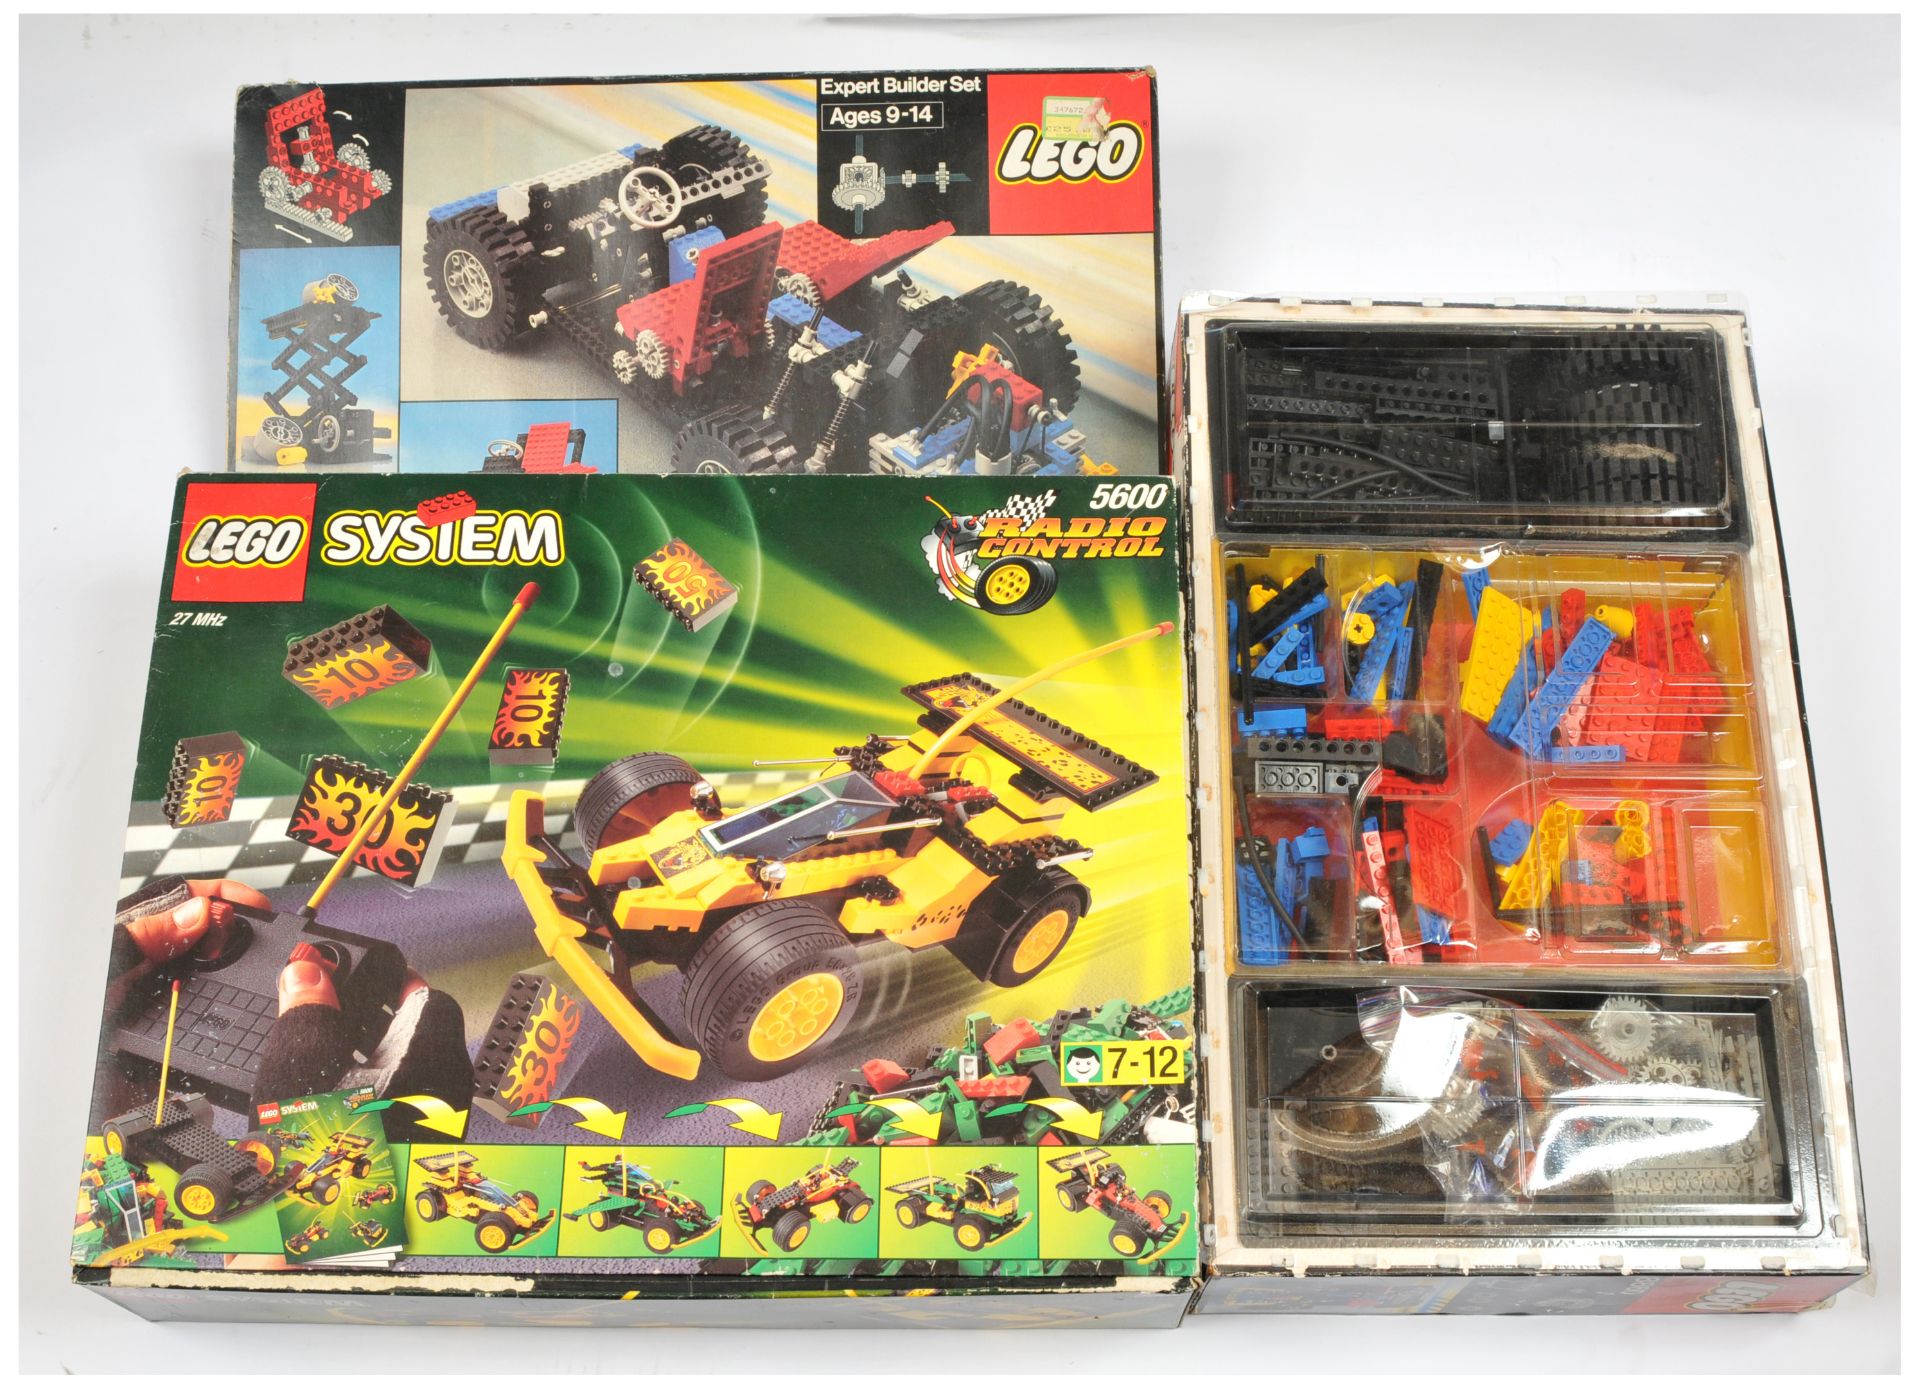 Lego Pair (1) Technic 8860 Expert Builder Car Chassis (2) 5600 Radio Control Car - Good to Excell...